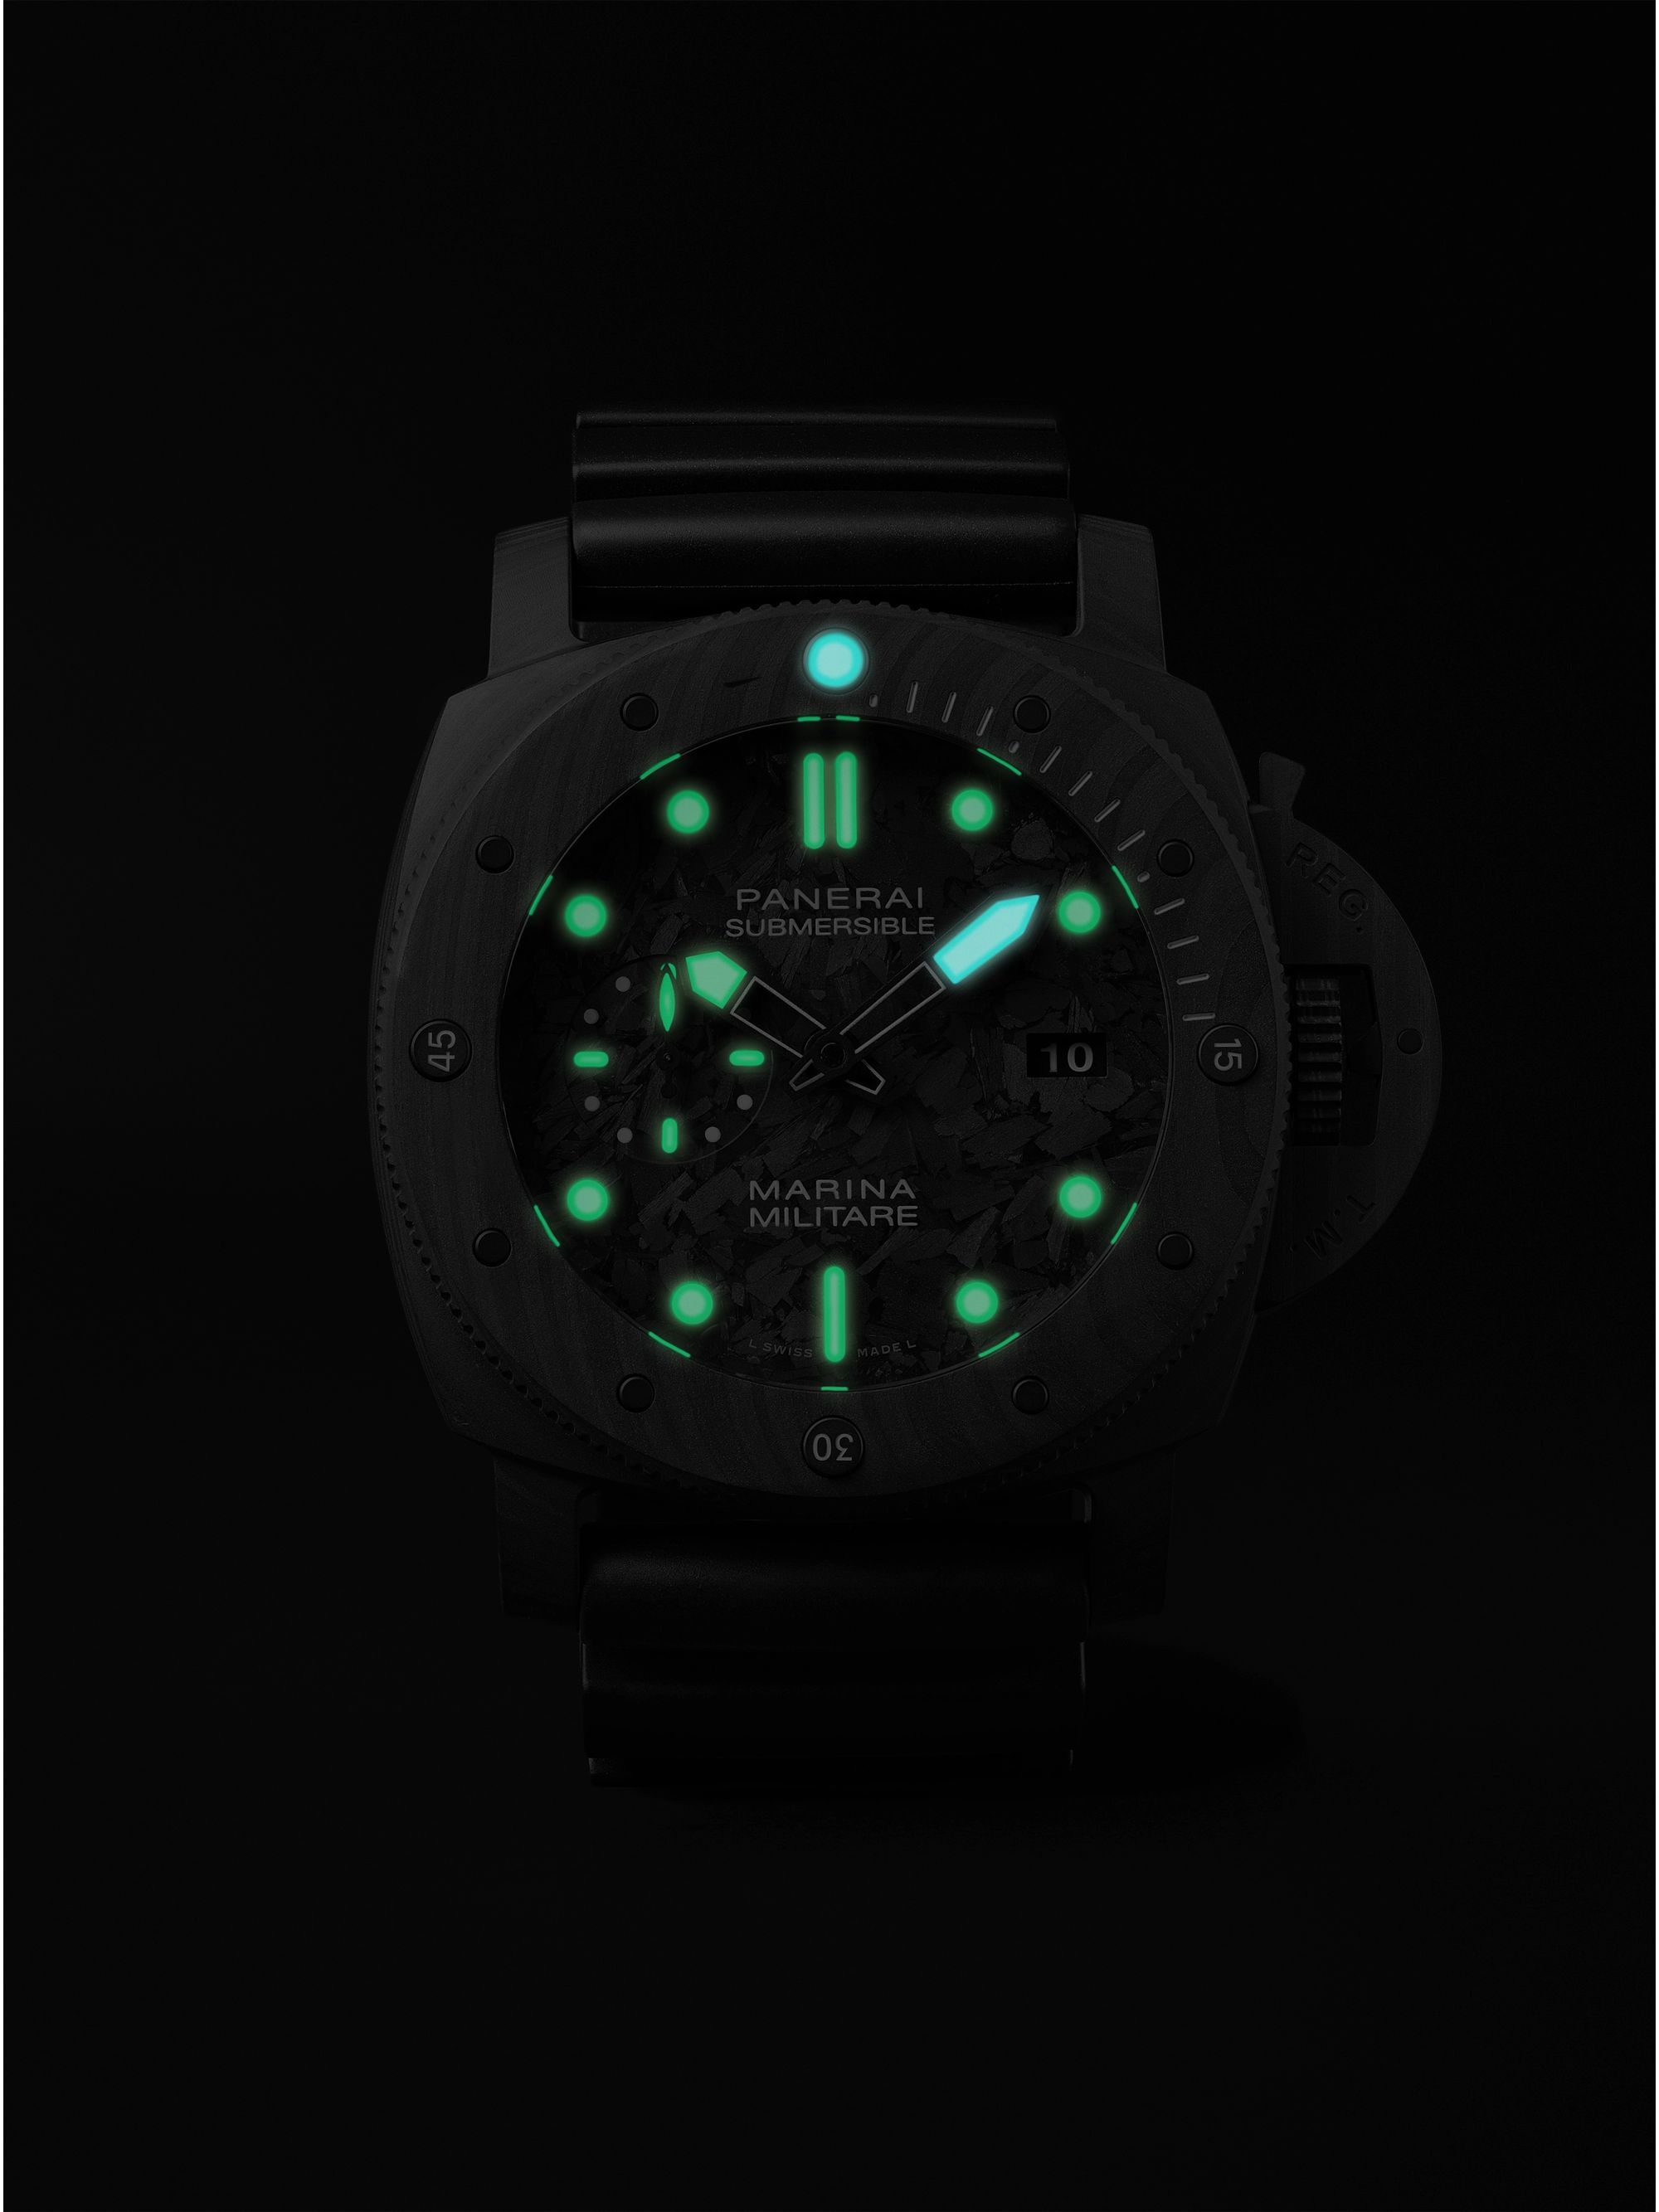 PANERAI Submersible Marina Militare Automatic 47mm Carbotech and Rubber Watch, Ref. No. PAM00979